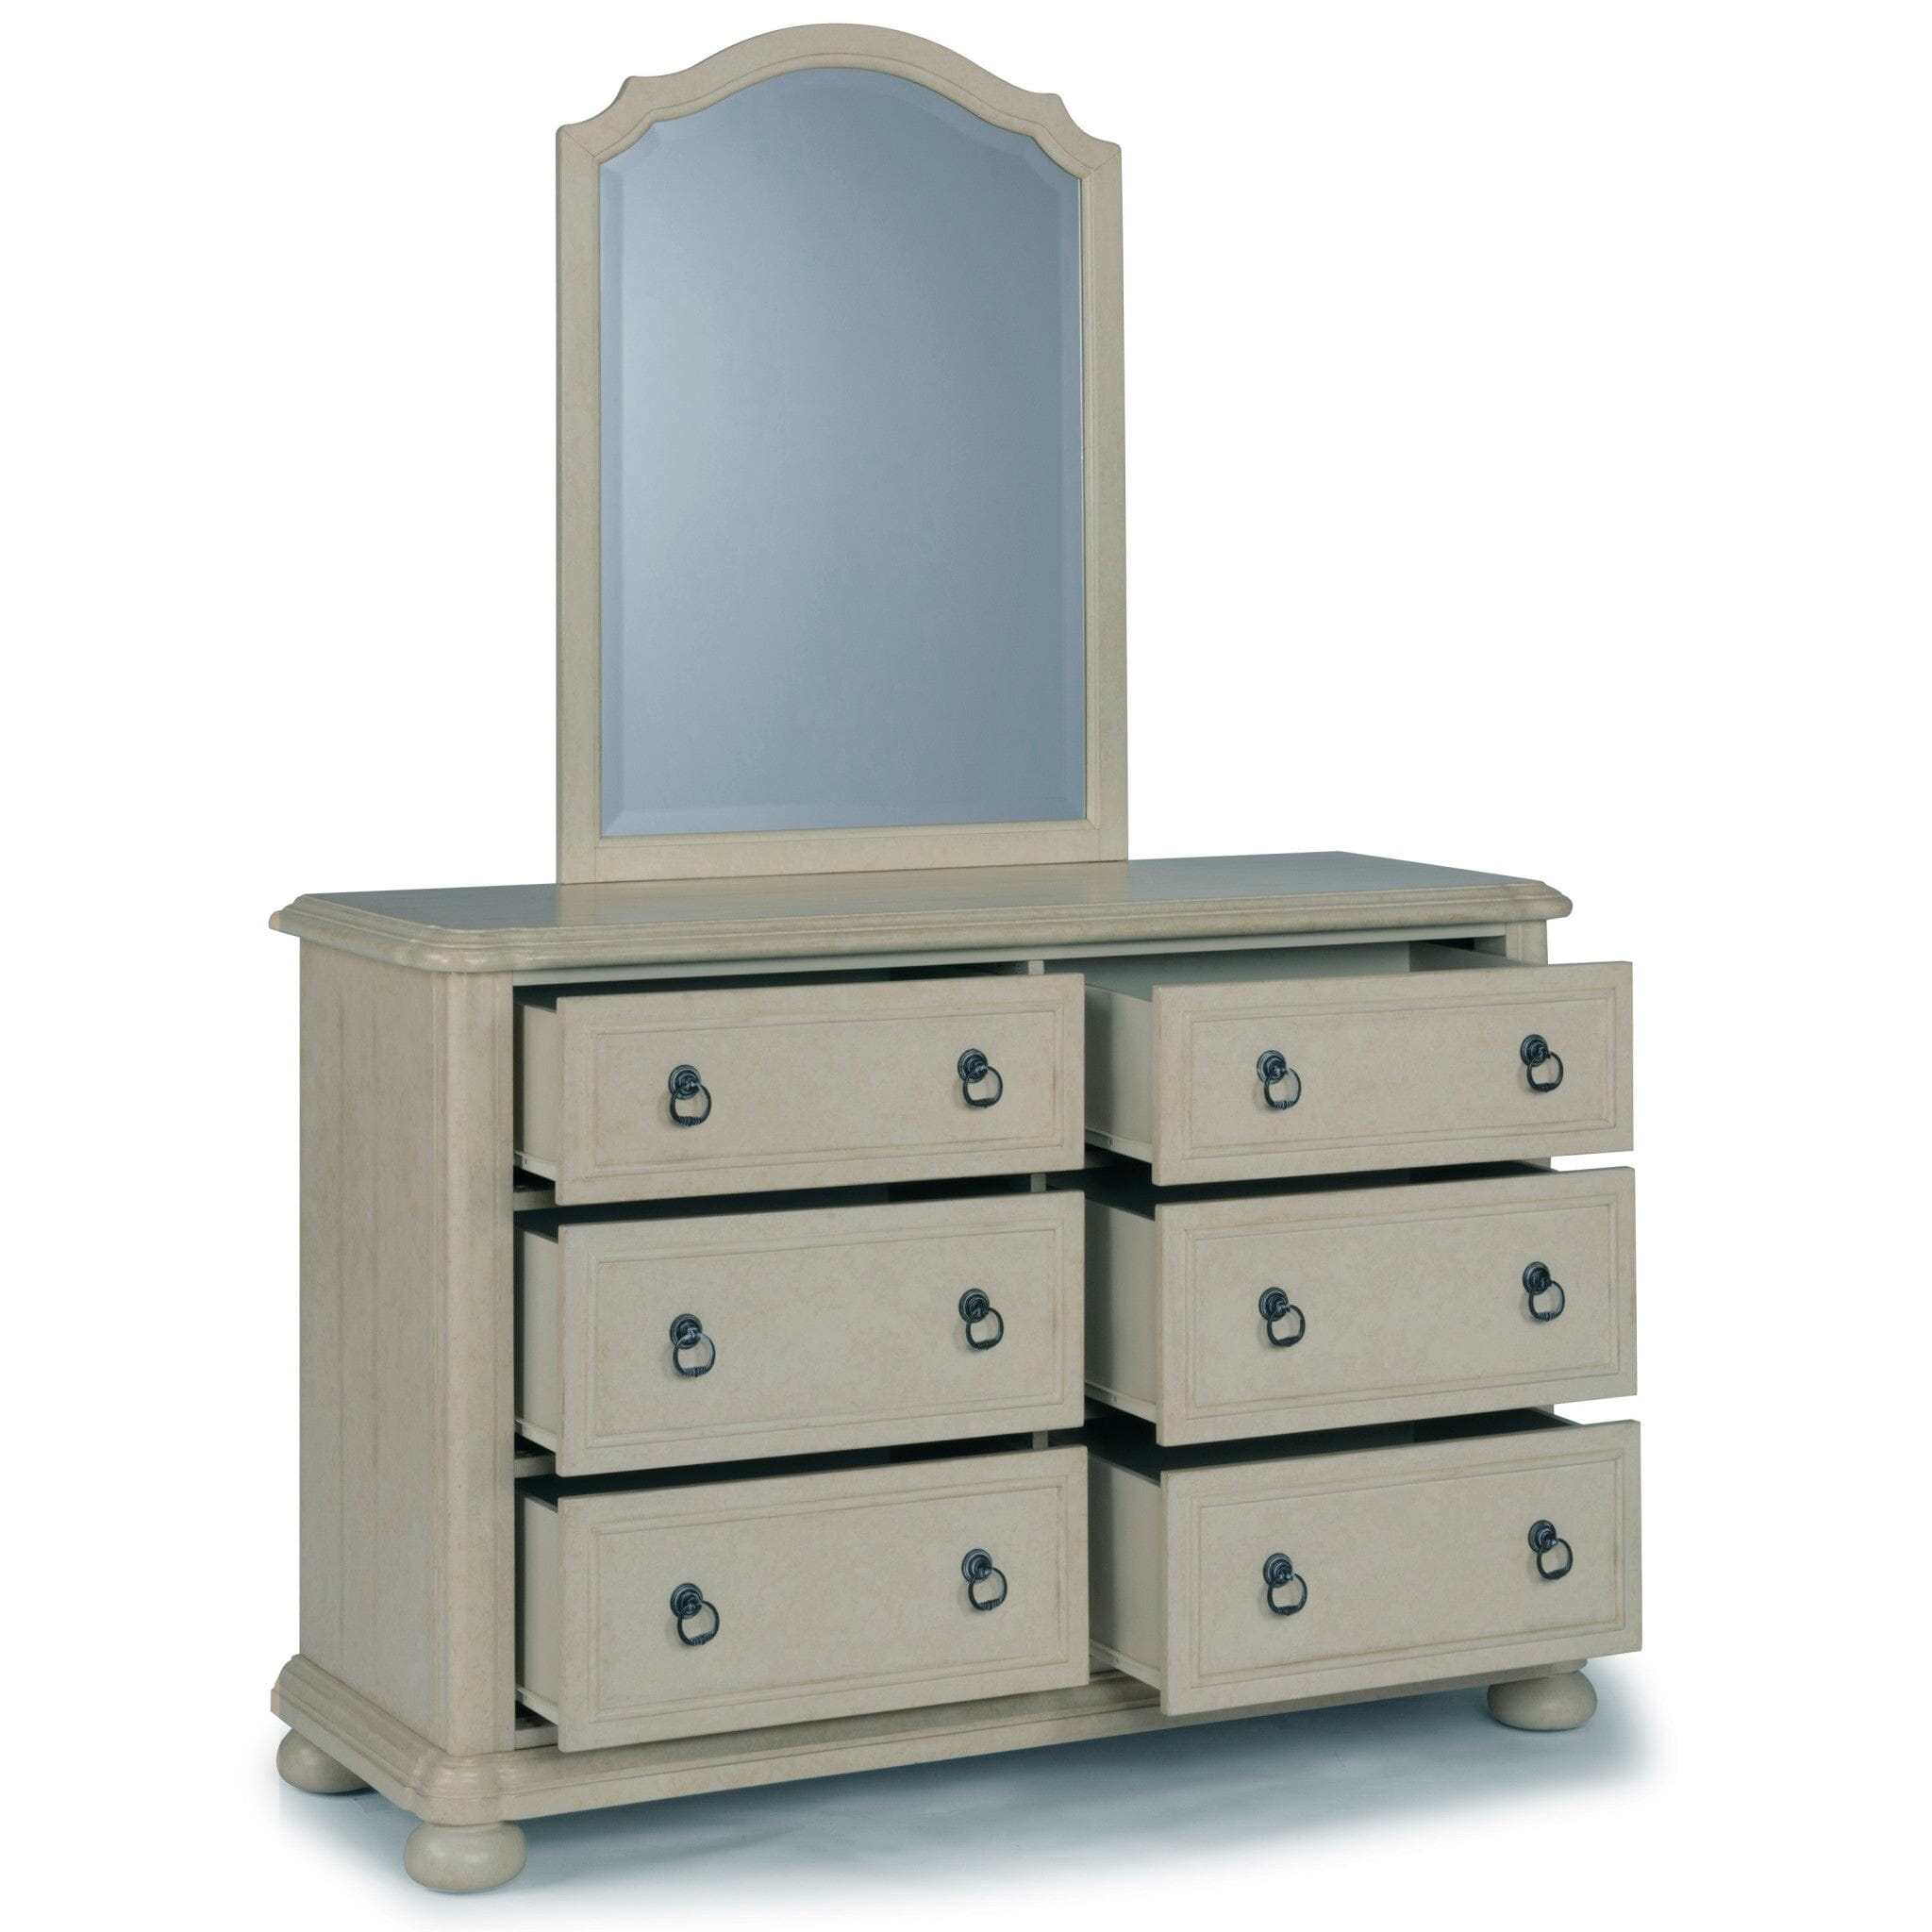 Rustic Farmhouse Dresser with Mirror By Provence Dresser Provence